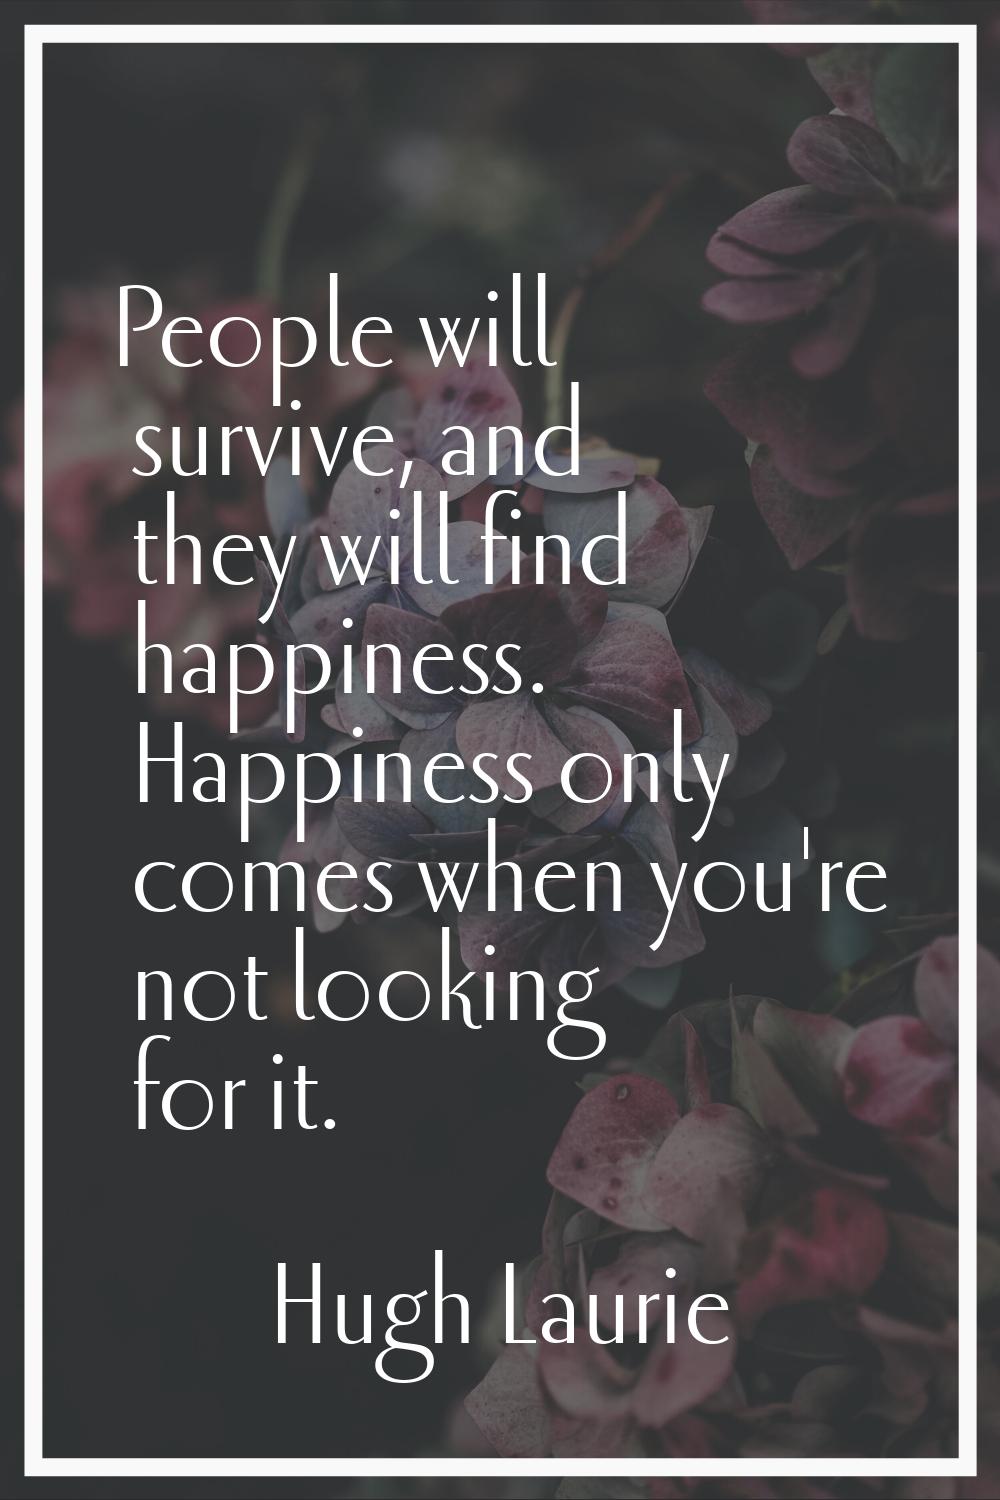 People will survive, and they will find happiness. Happiness only comes when you're not looking for